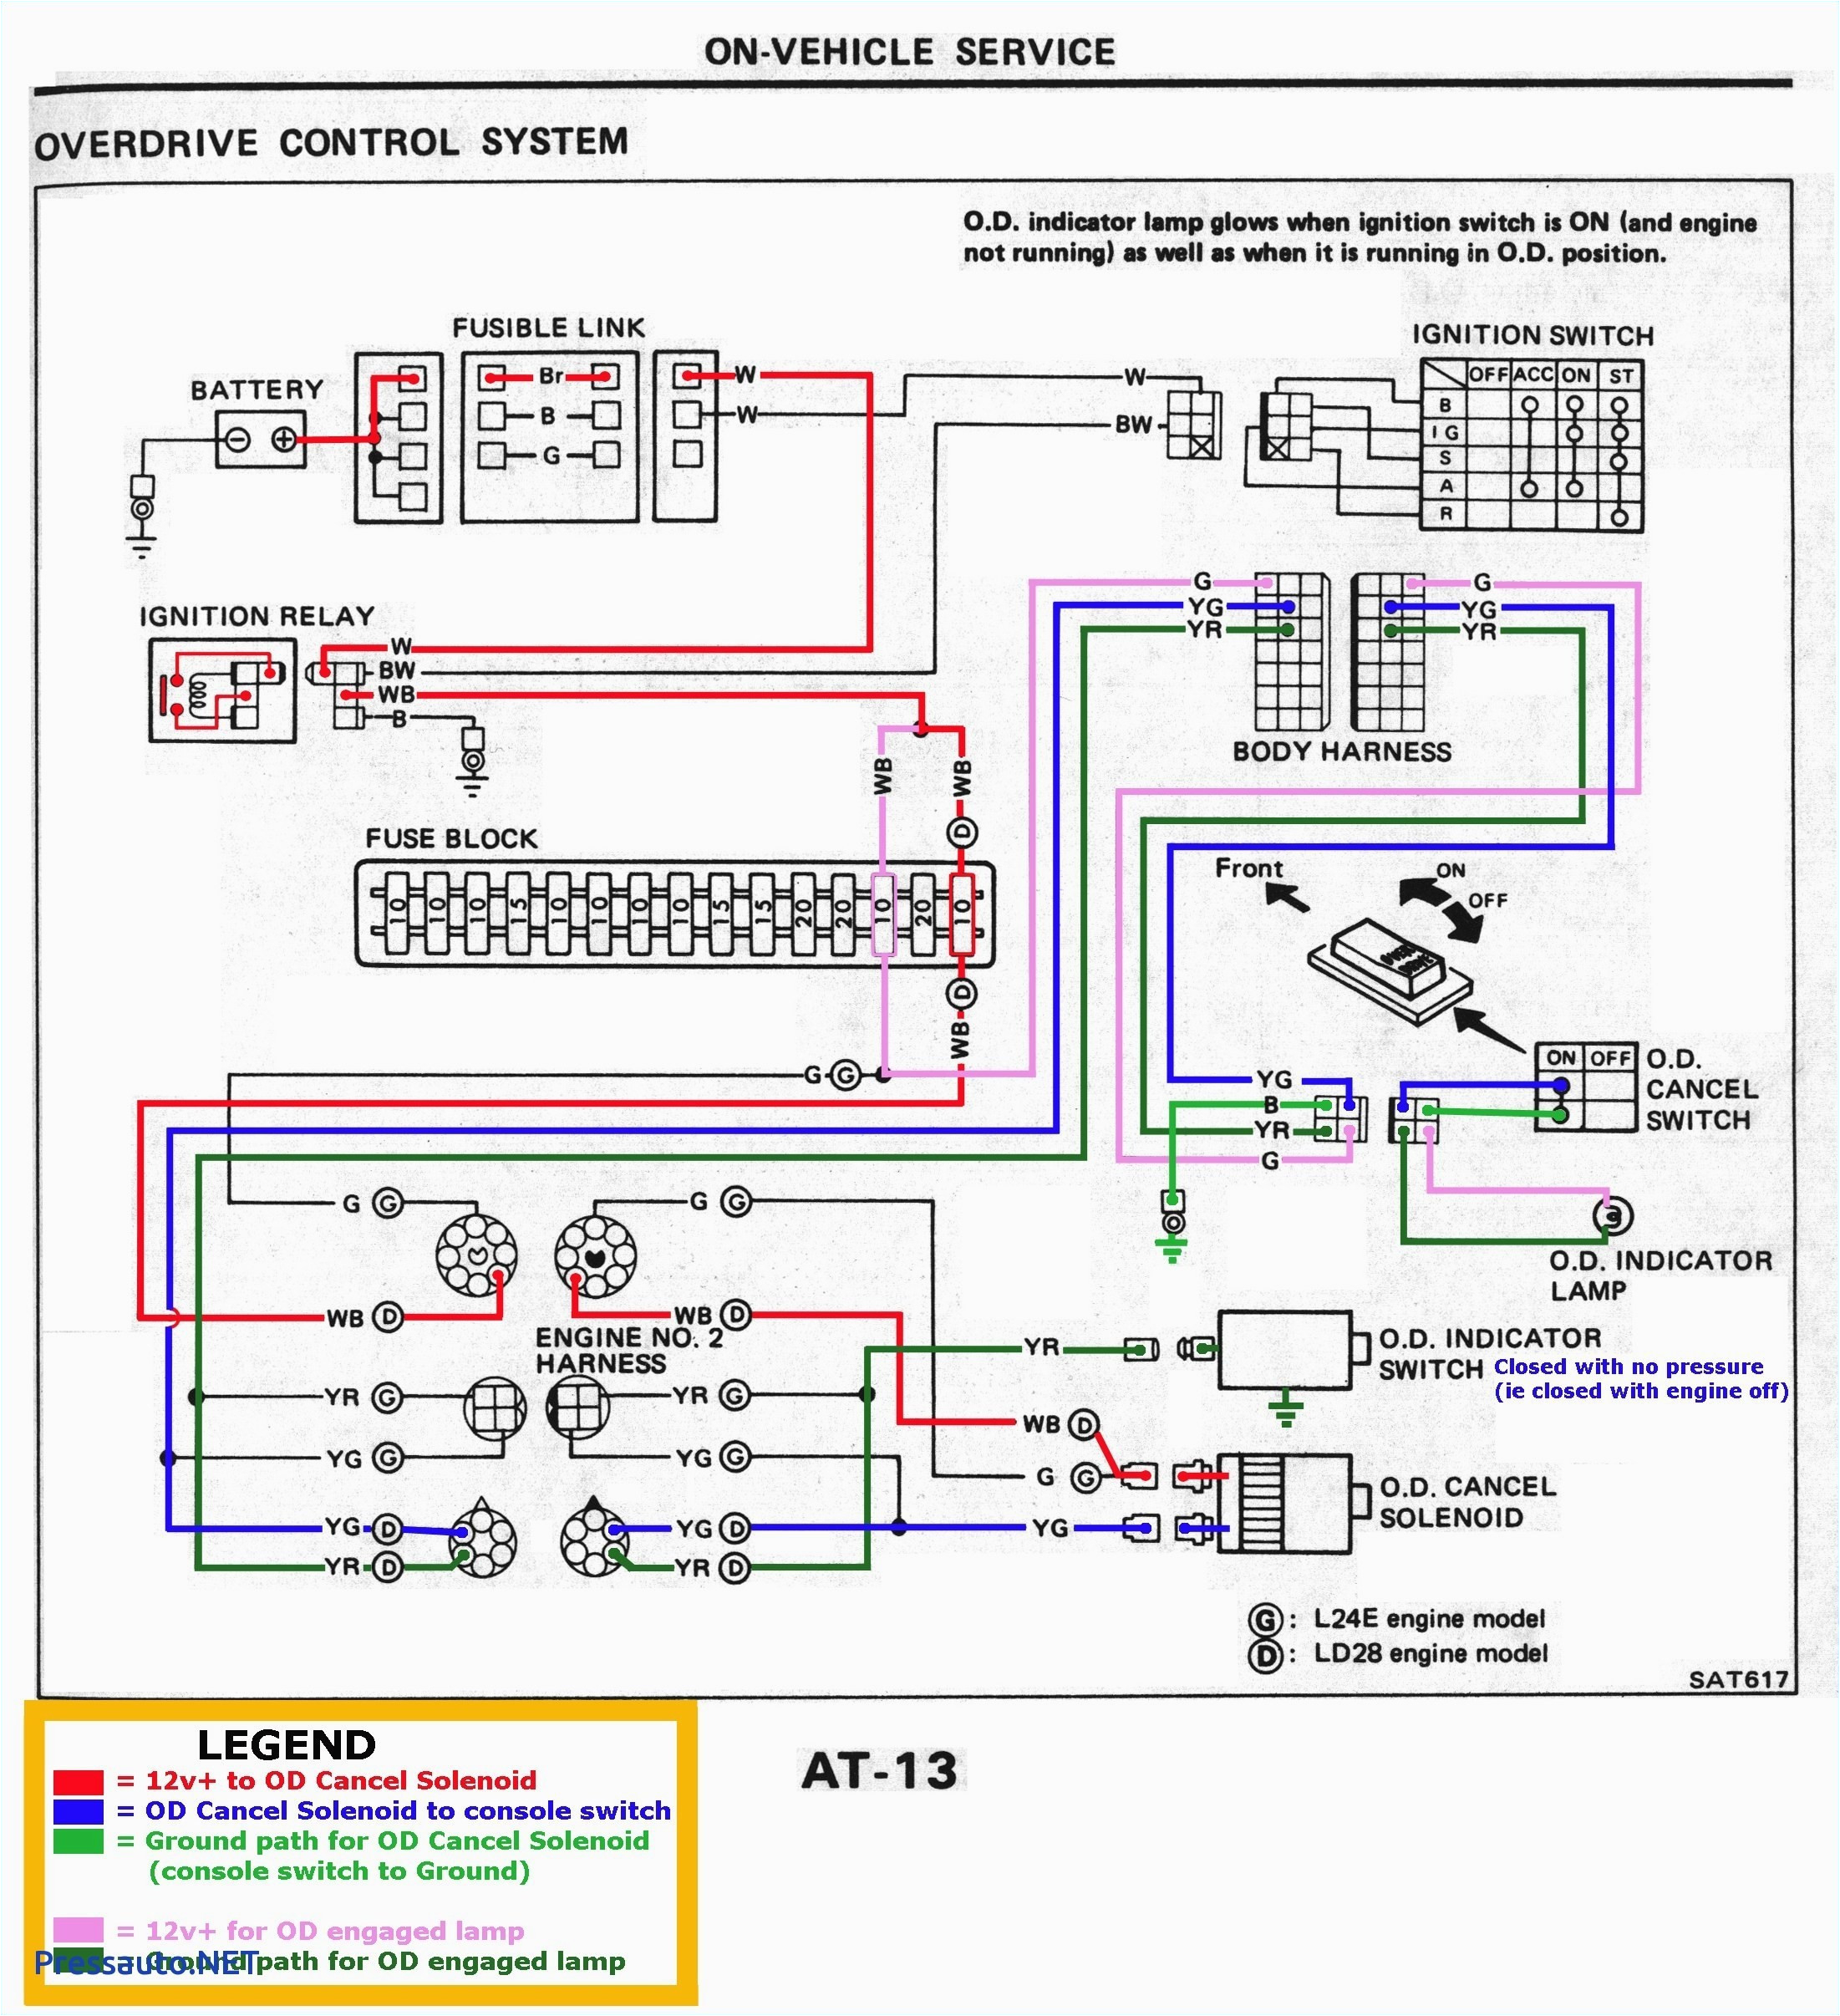 electrical wiring diagram nz wiring diagram show house wiring colours nz blog wiring diagram electrical wiring